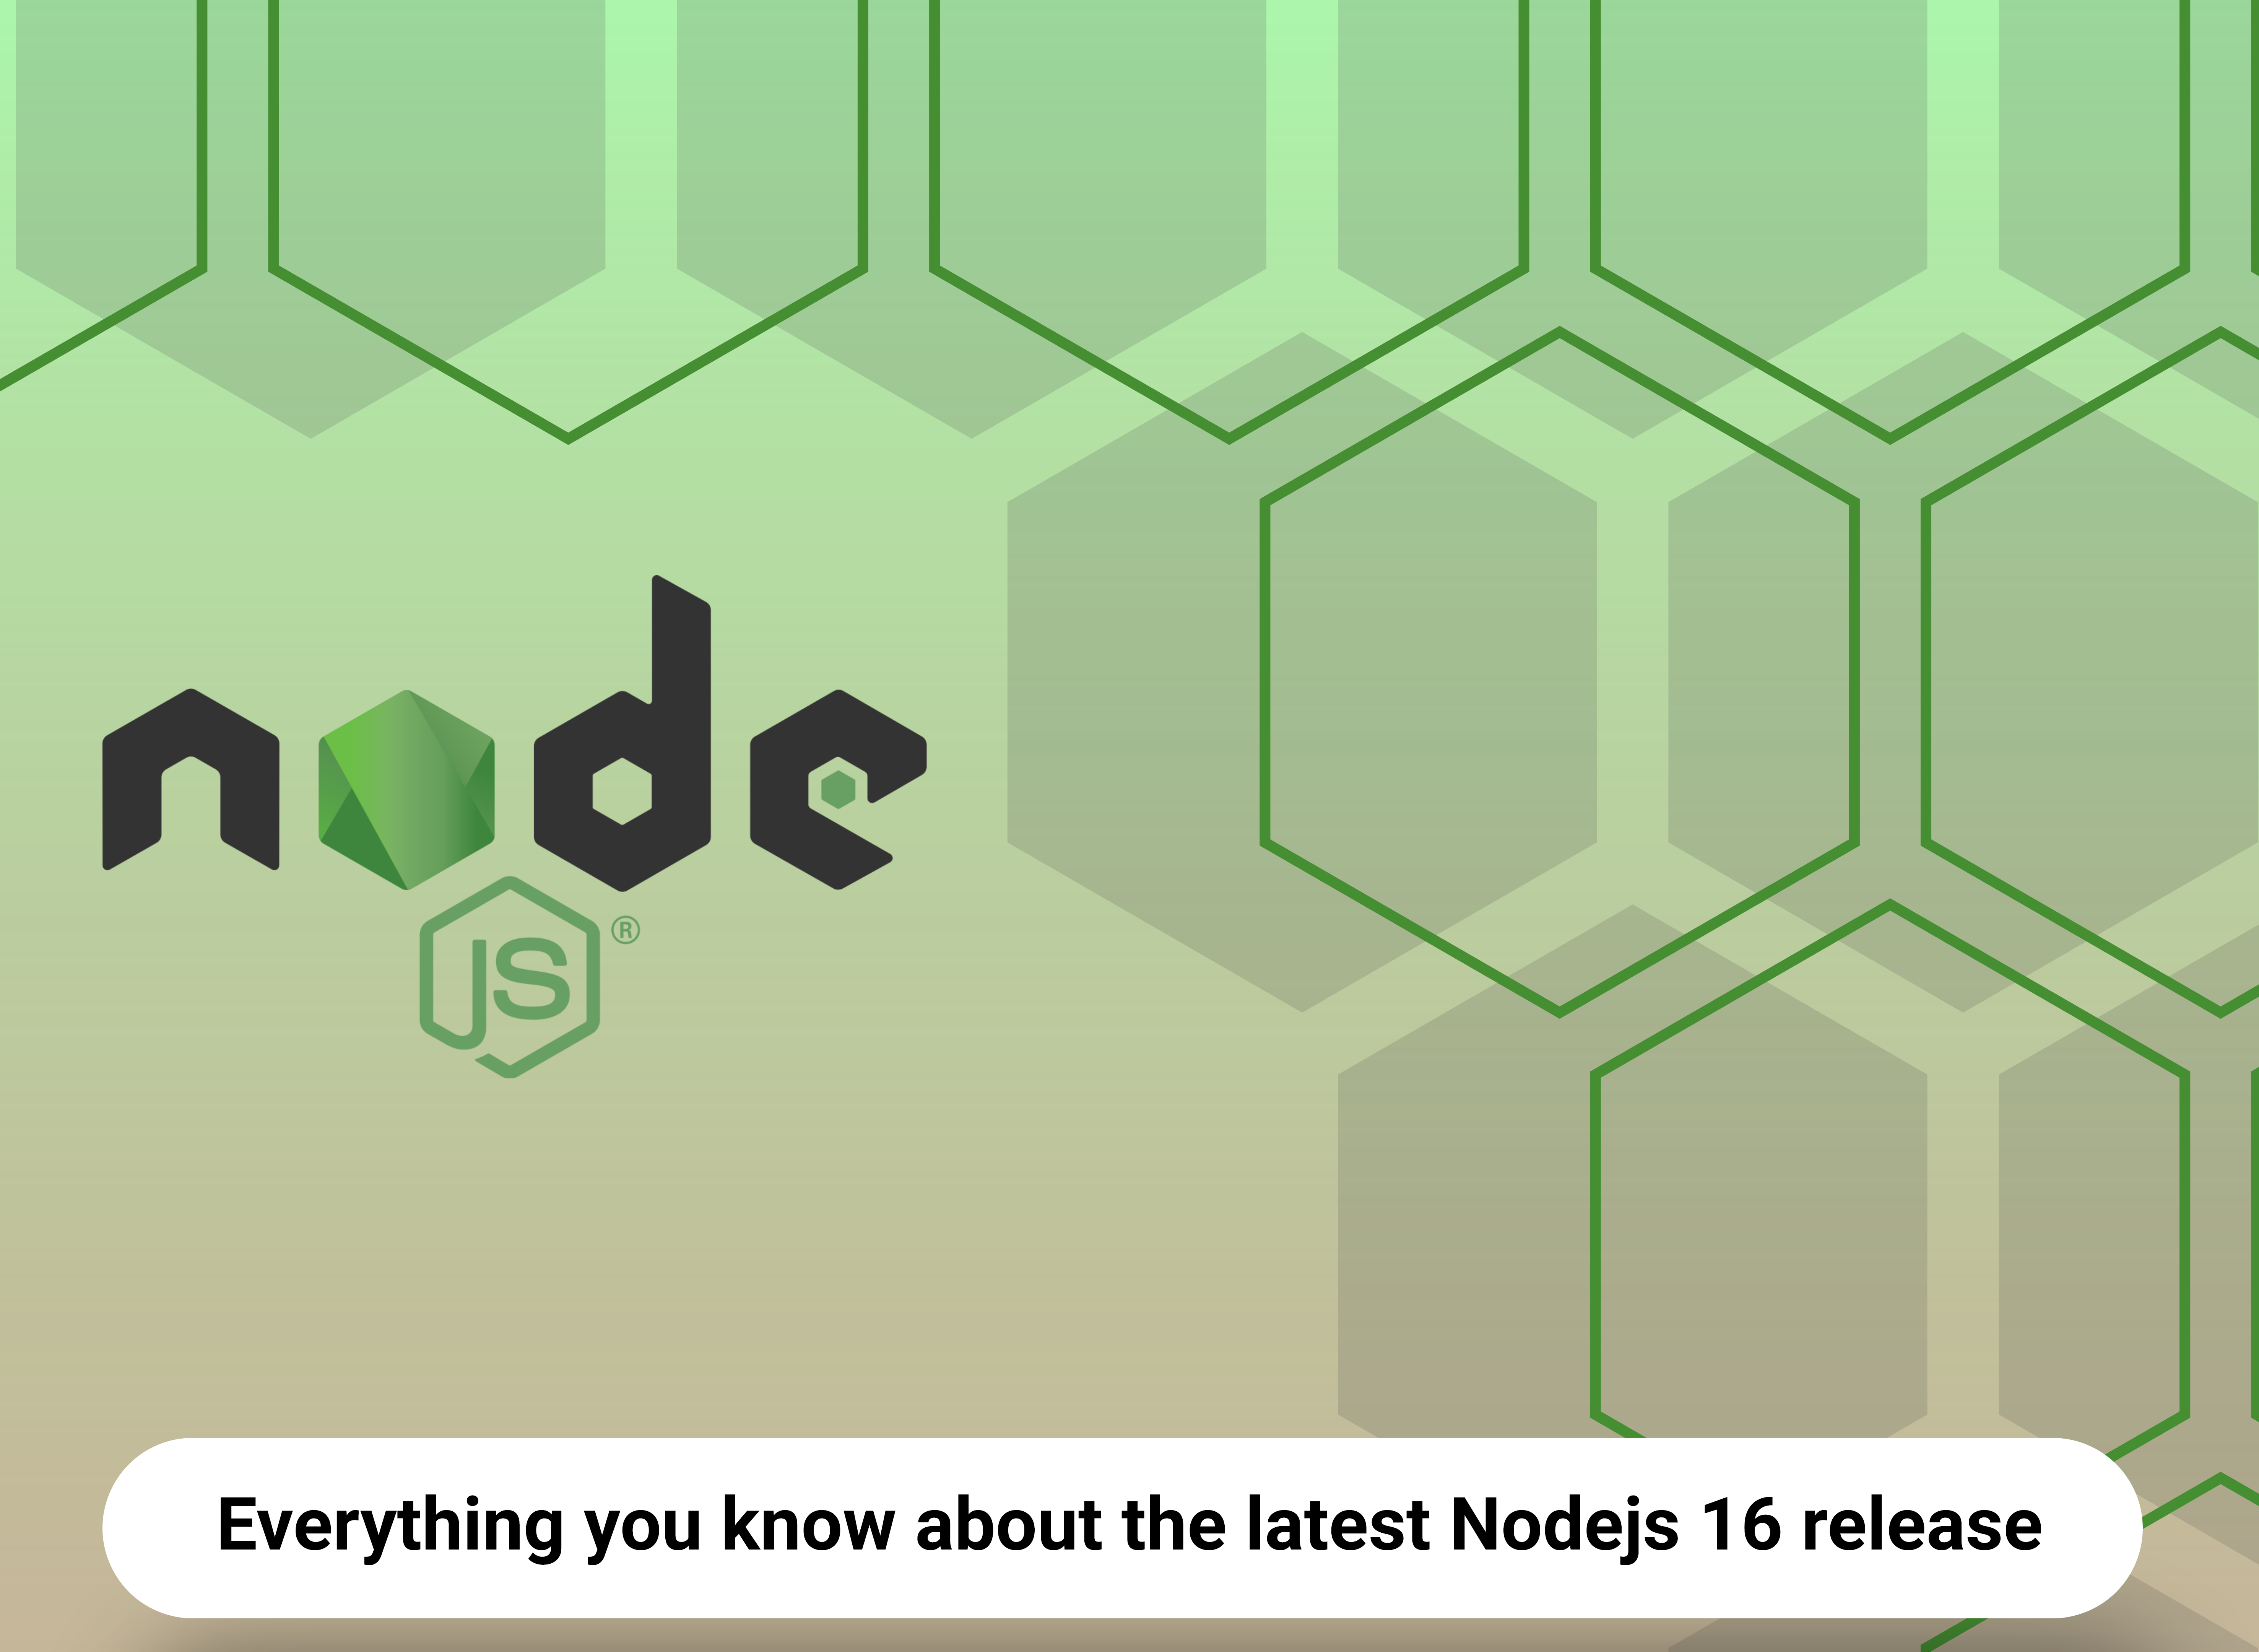 Everything You Know About the Latest Nodejs 16